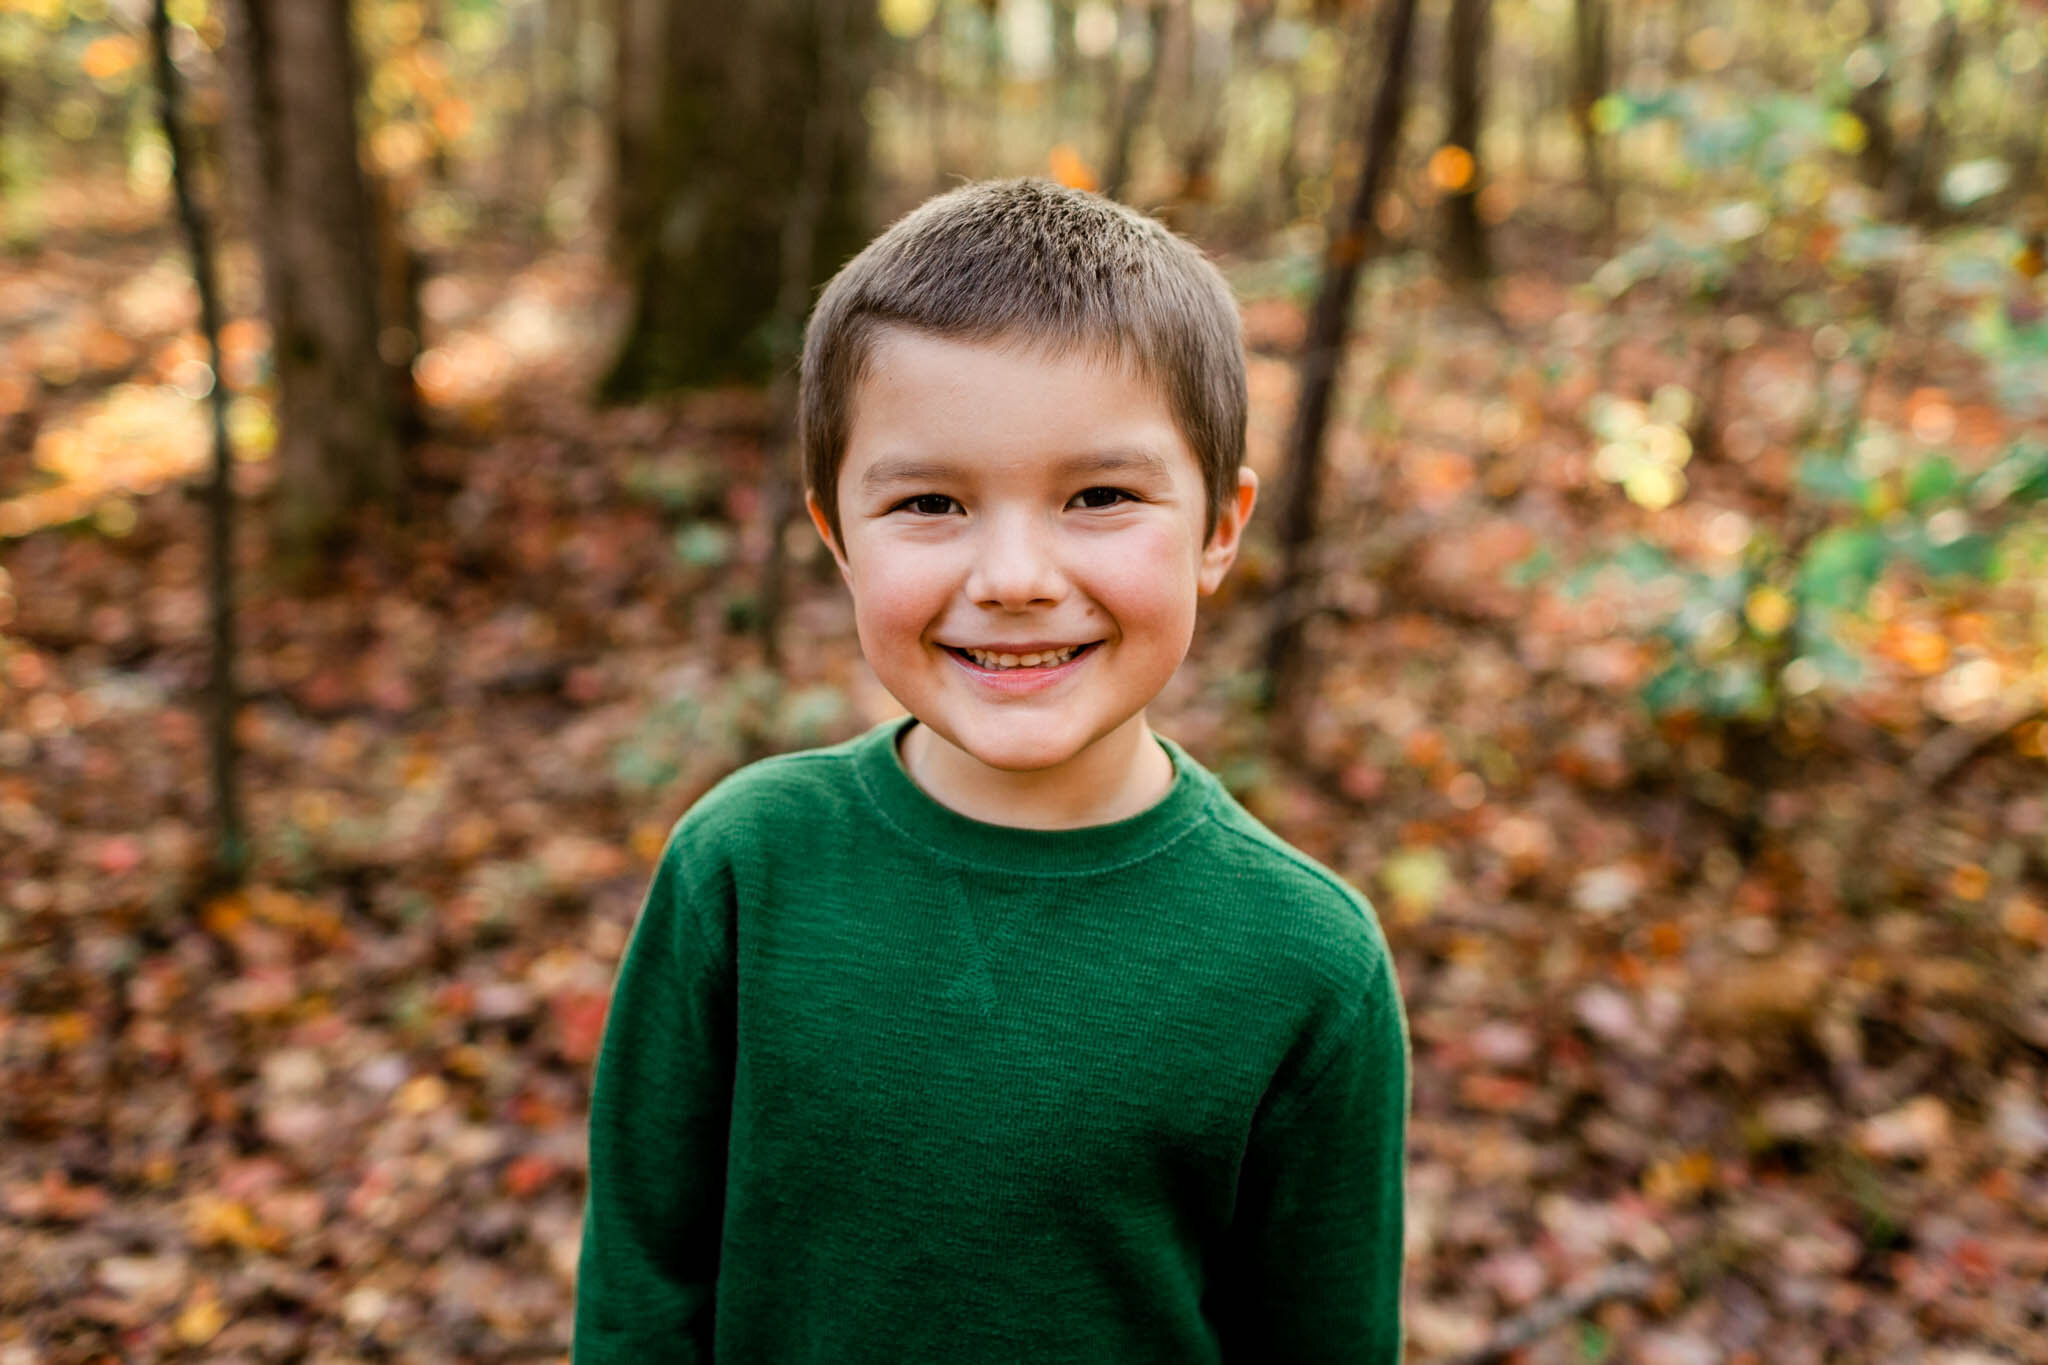 Apex Family Photographer | By G. Lin Photography | Young boy wearing green shirt